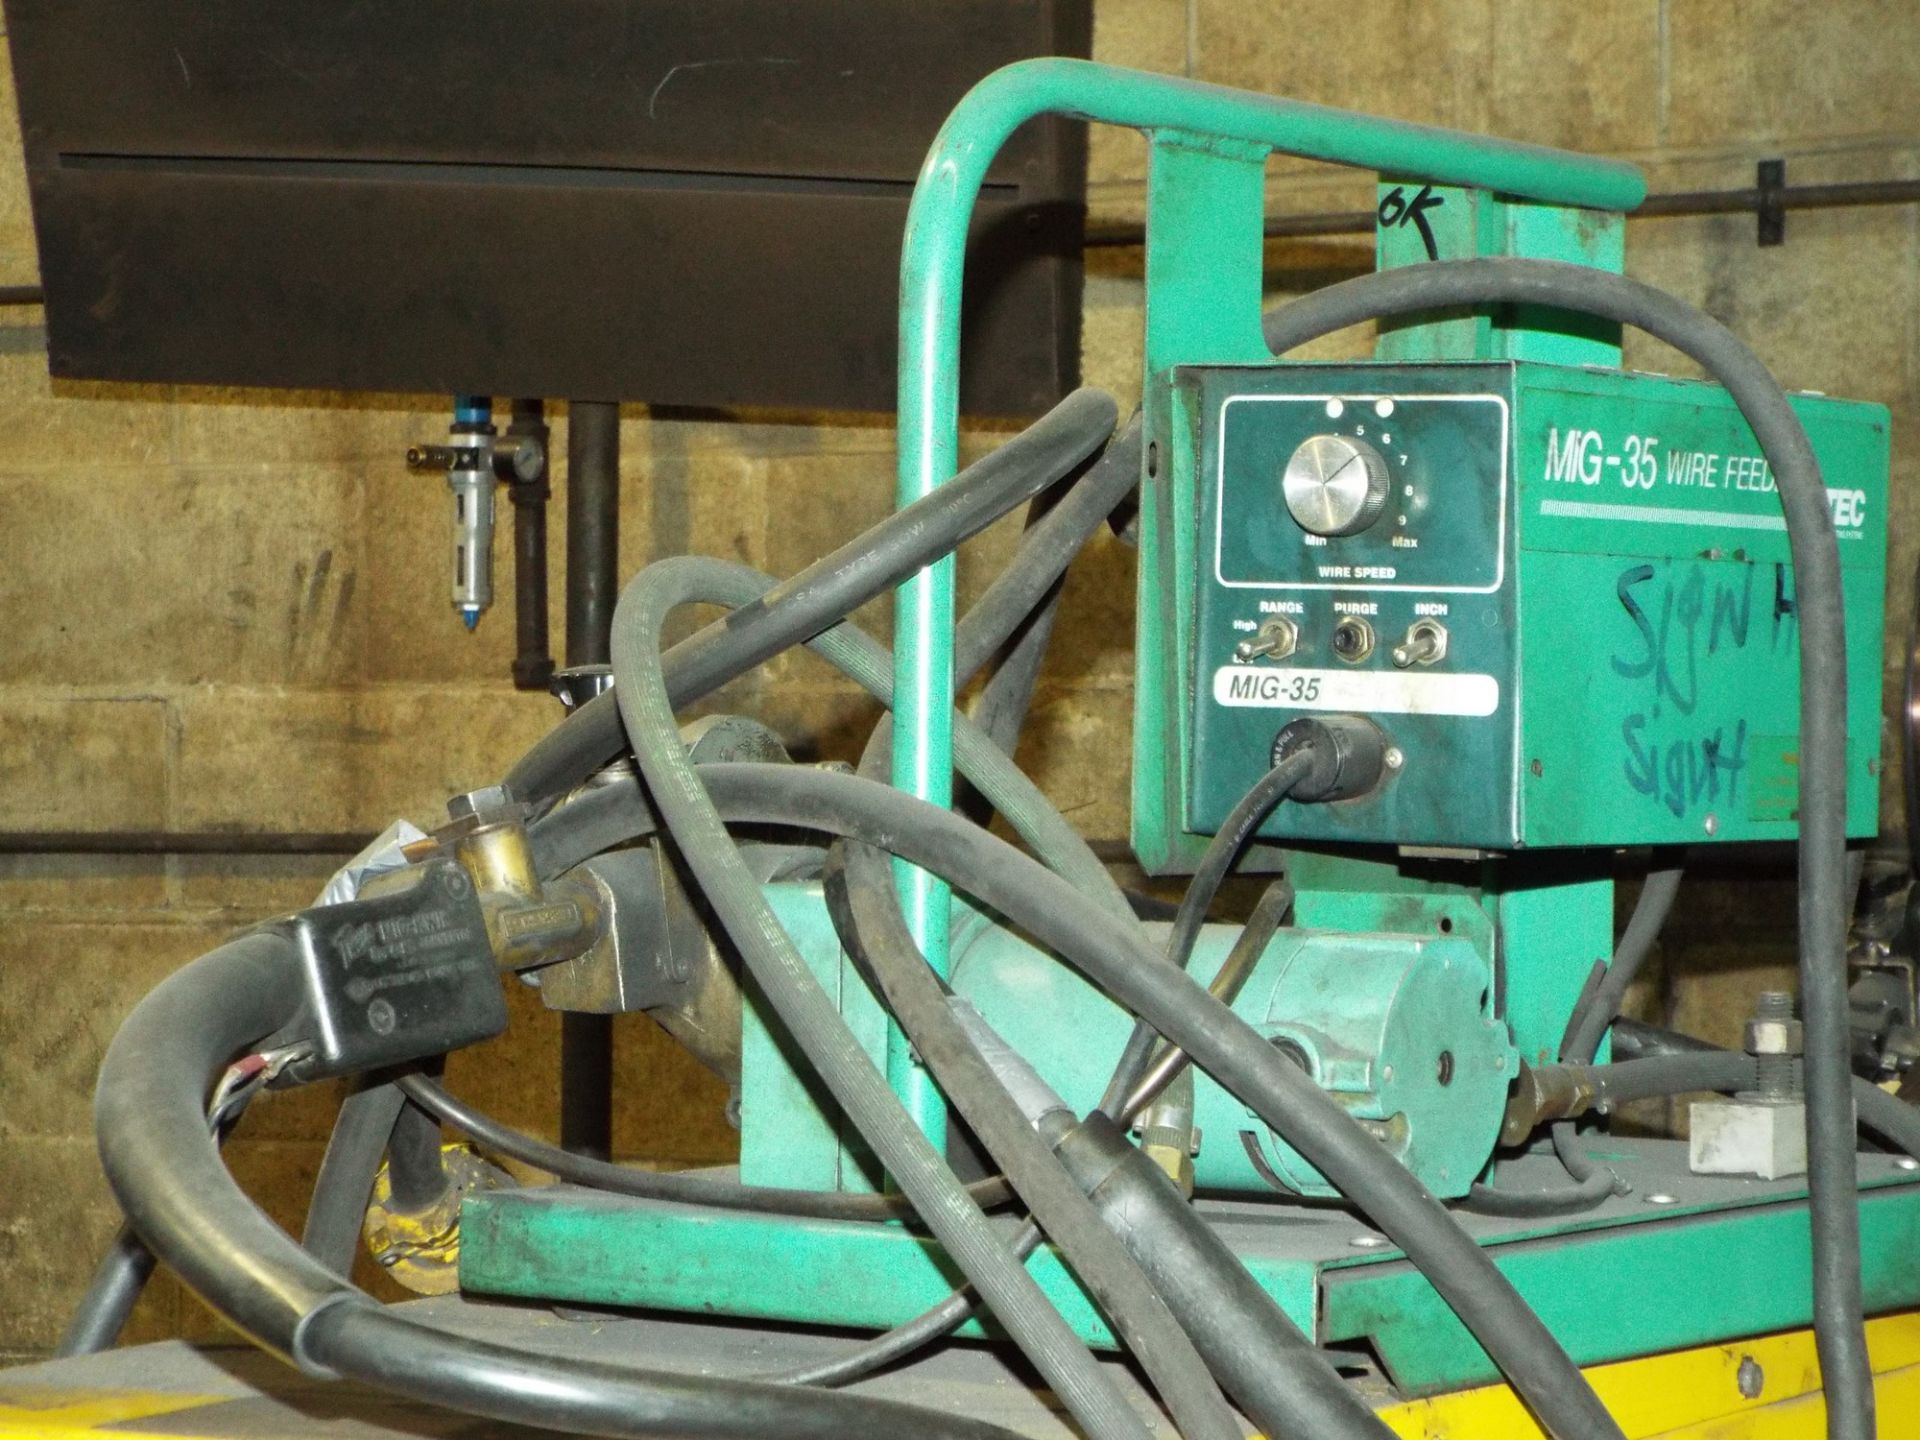 ESAB VI-300 MIG WELDER WITH L-TEC MIG-35 WIRE FEED, CABLES & GUN S/N: MD-1607017 (CI) - Image 2 of 2